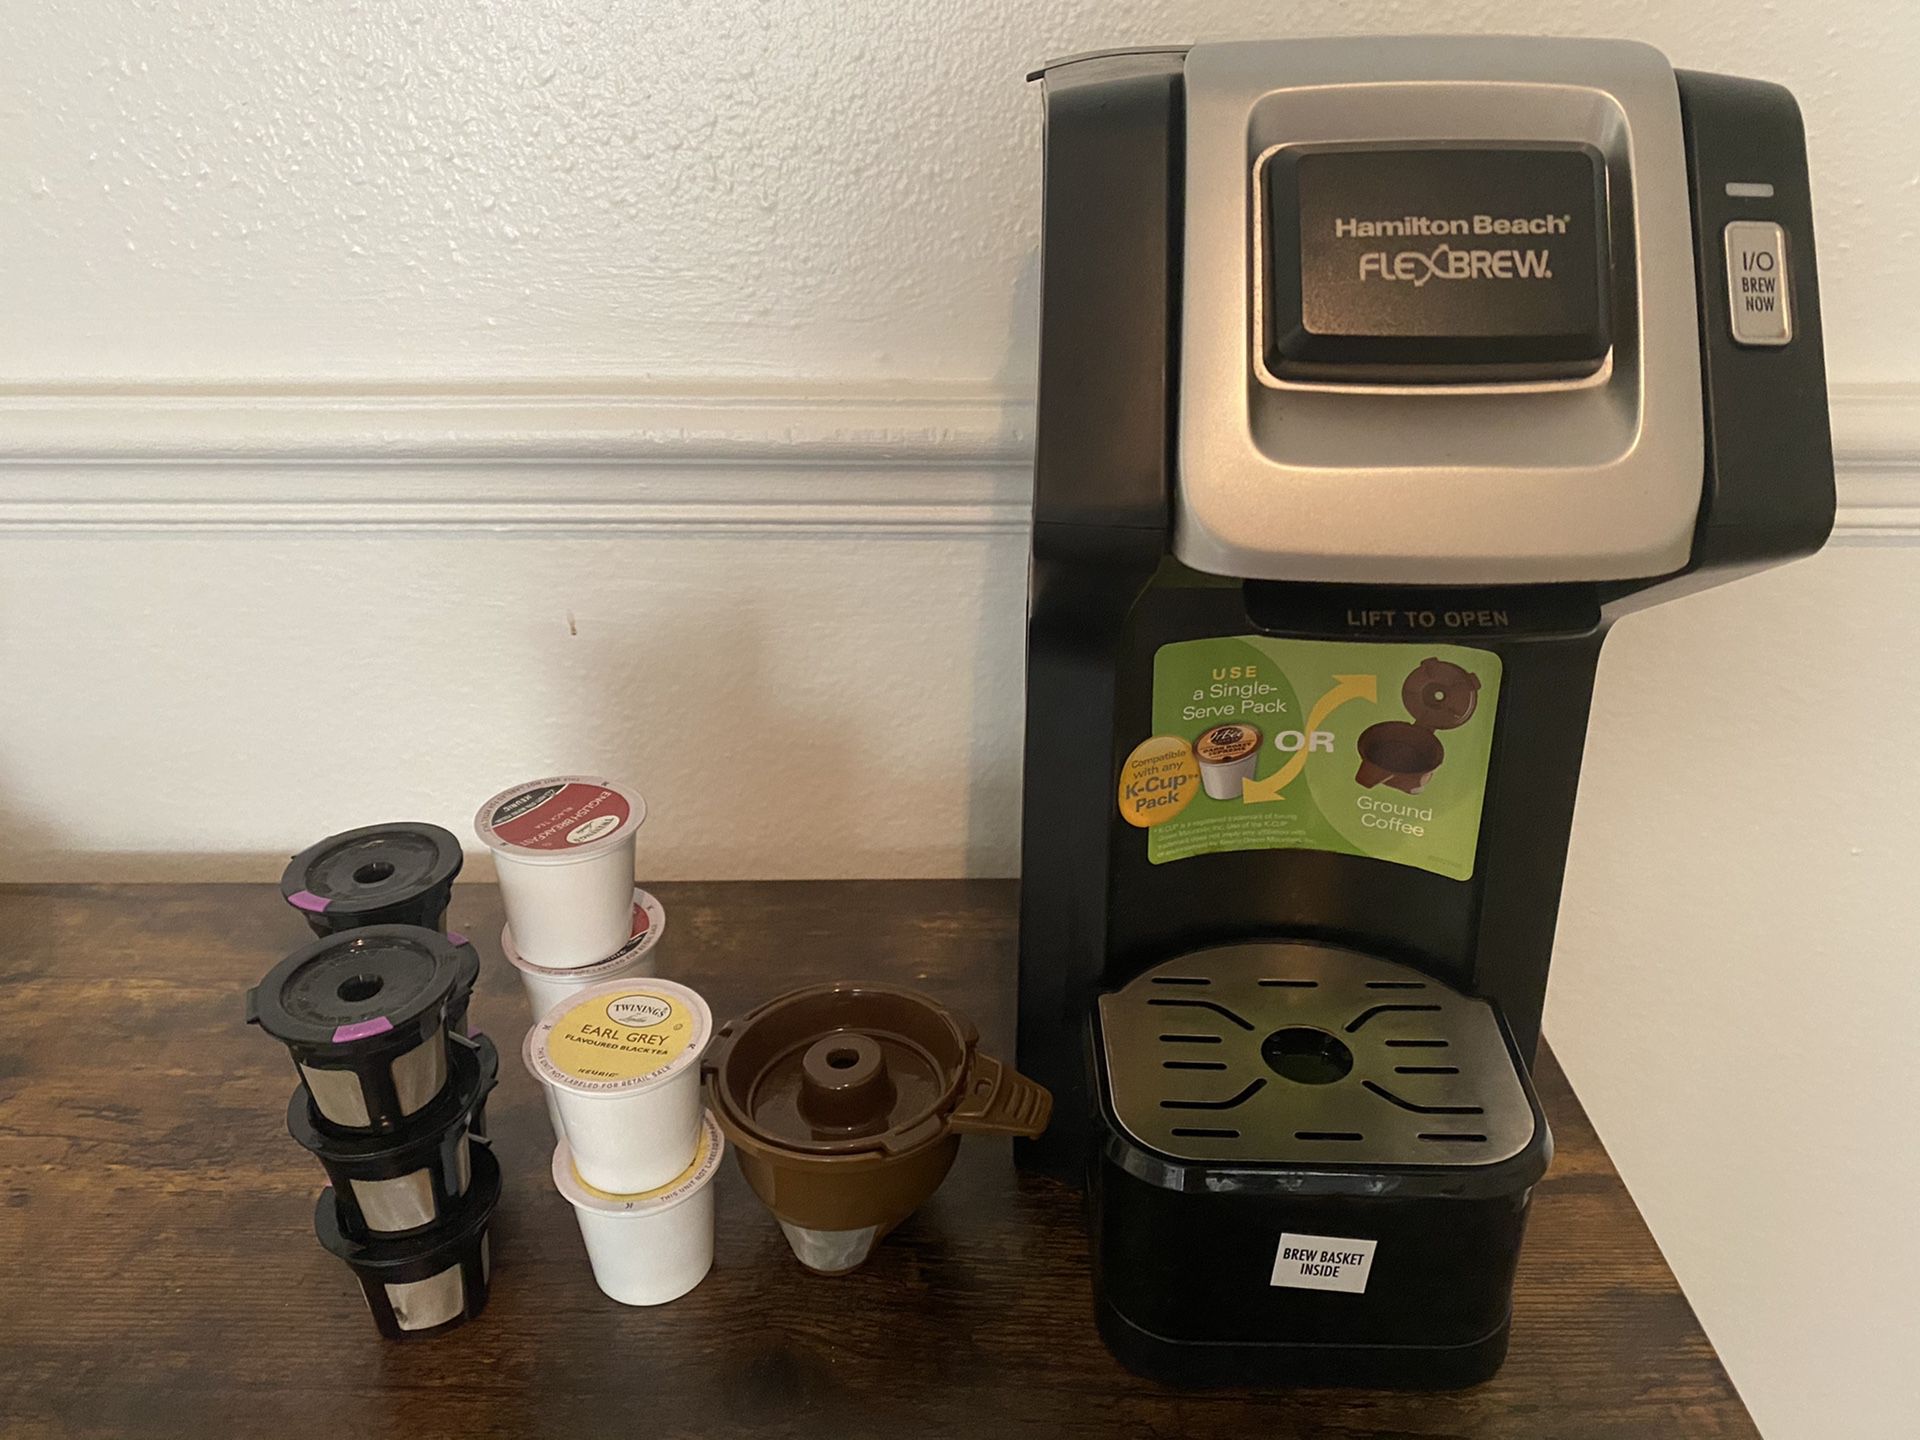 Hamilton beach coffee maker, compatible with k-cup